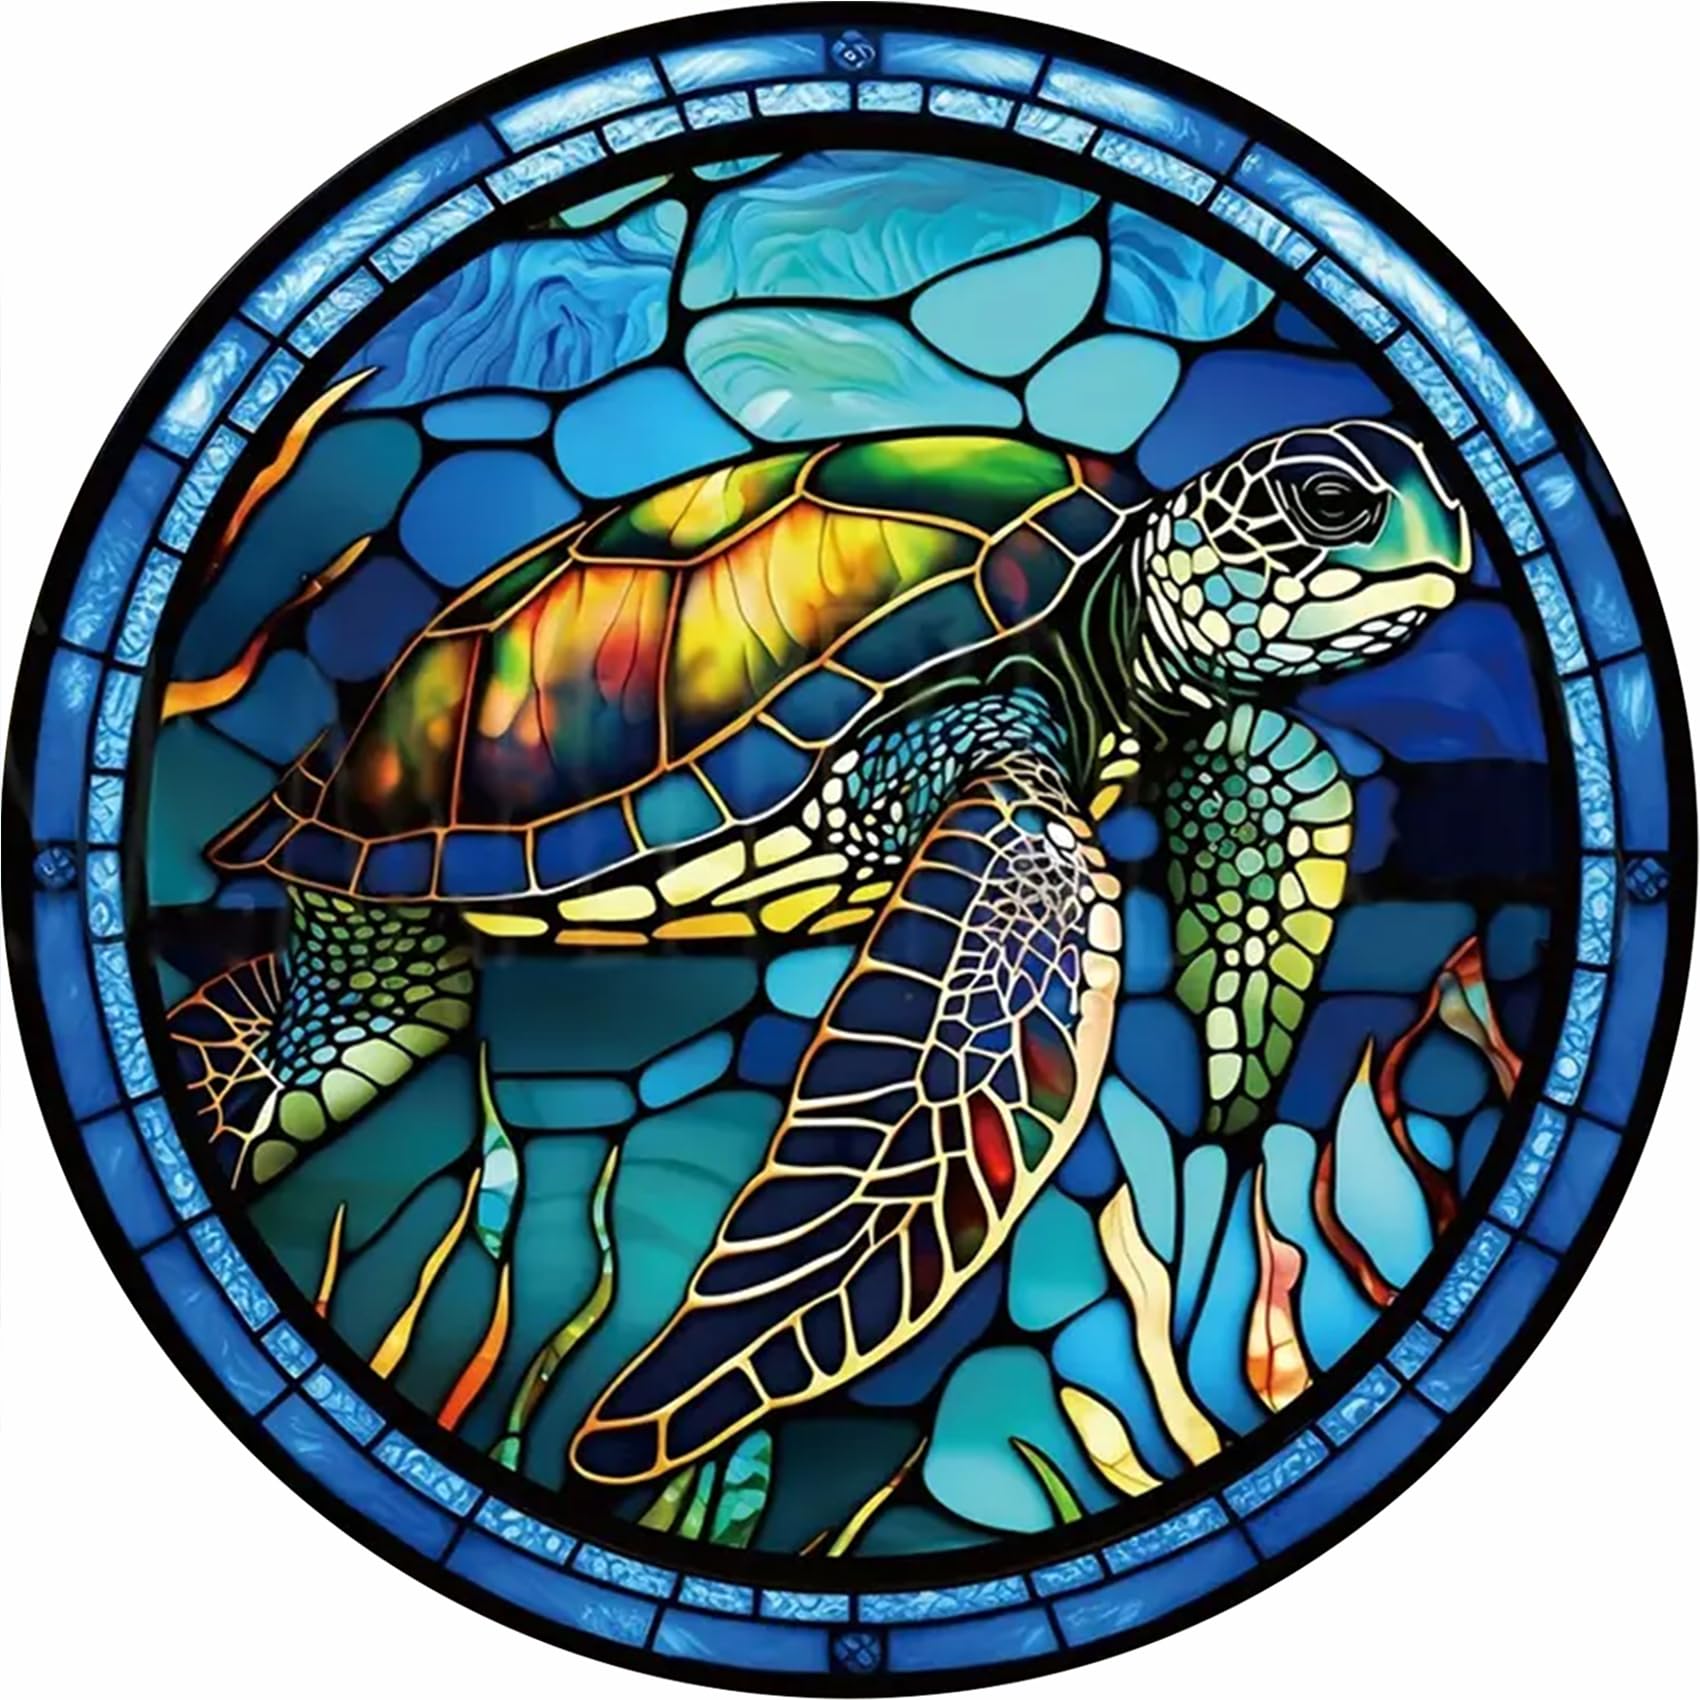 Aestalrcus 5D Turtle Diamond Painting Kits for Adults,Stained Glass Tu –  WoodArtSupply